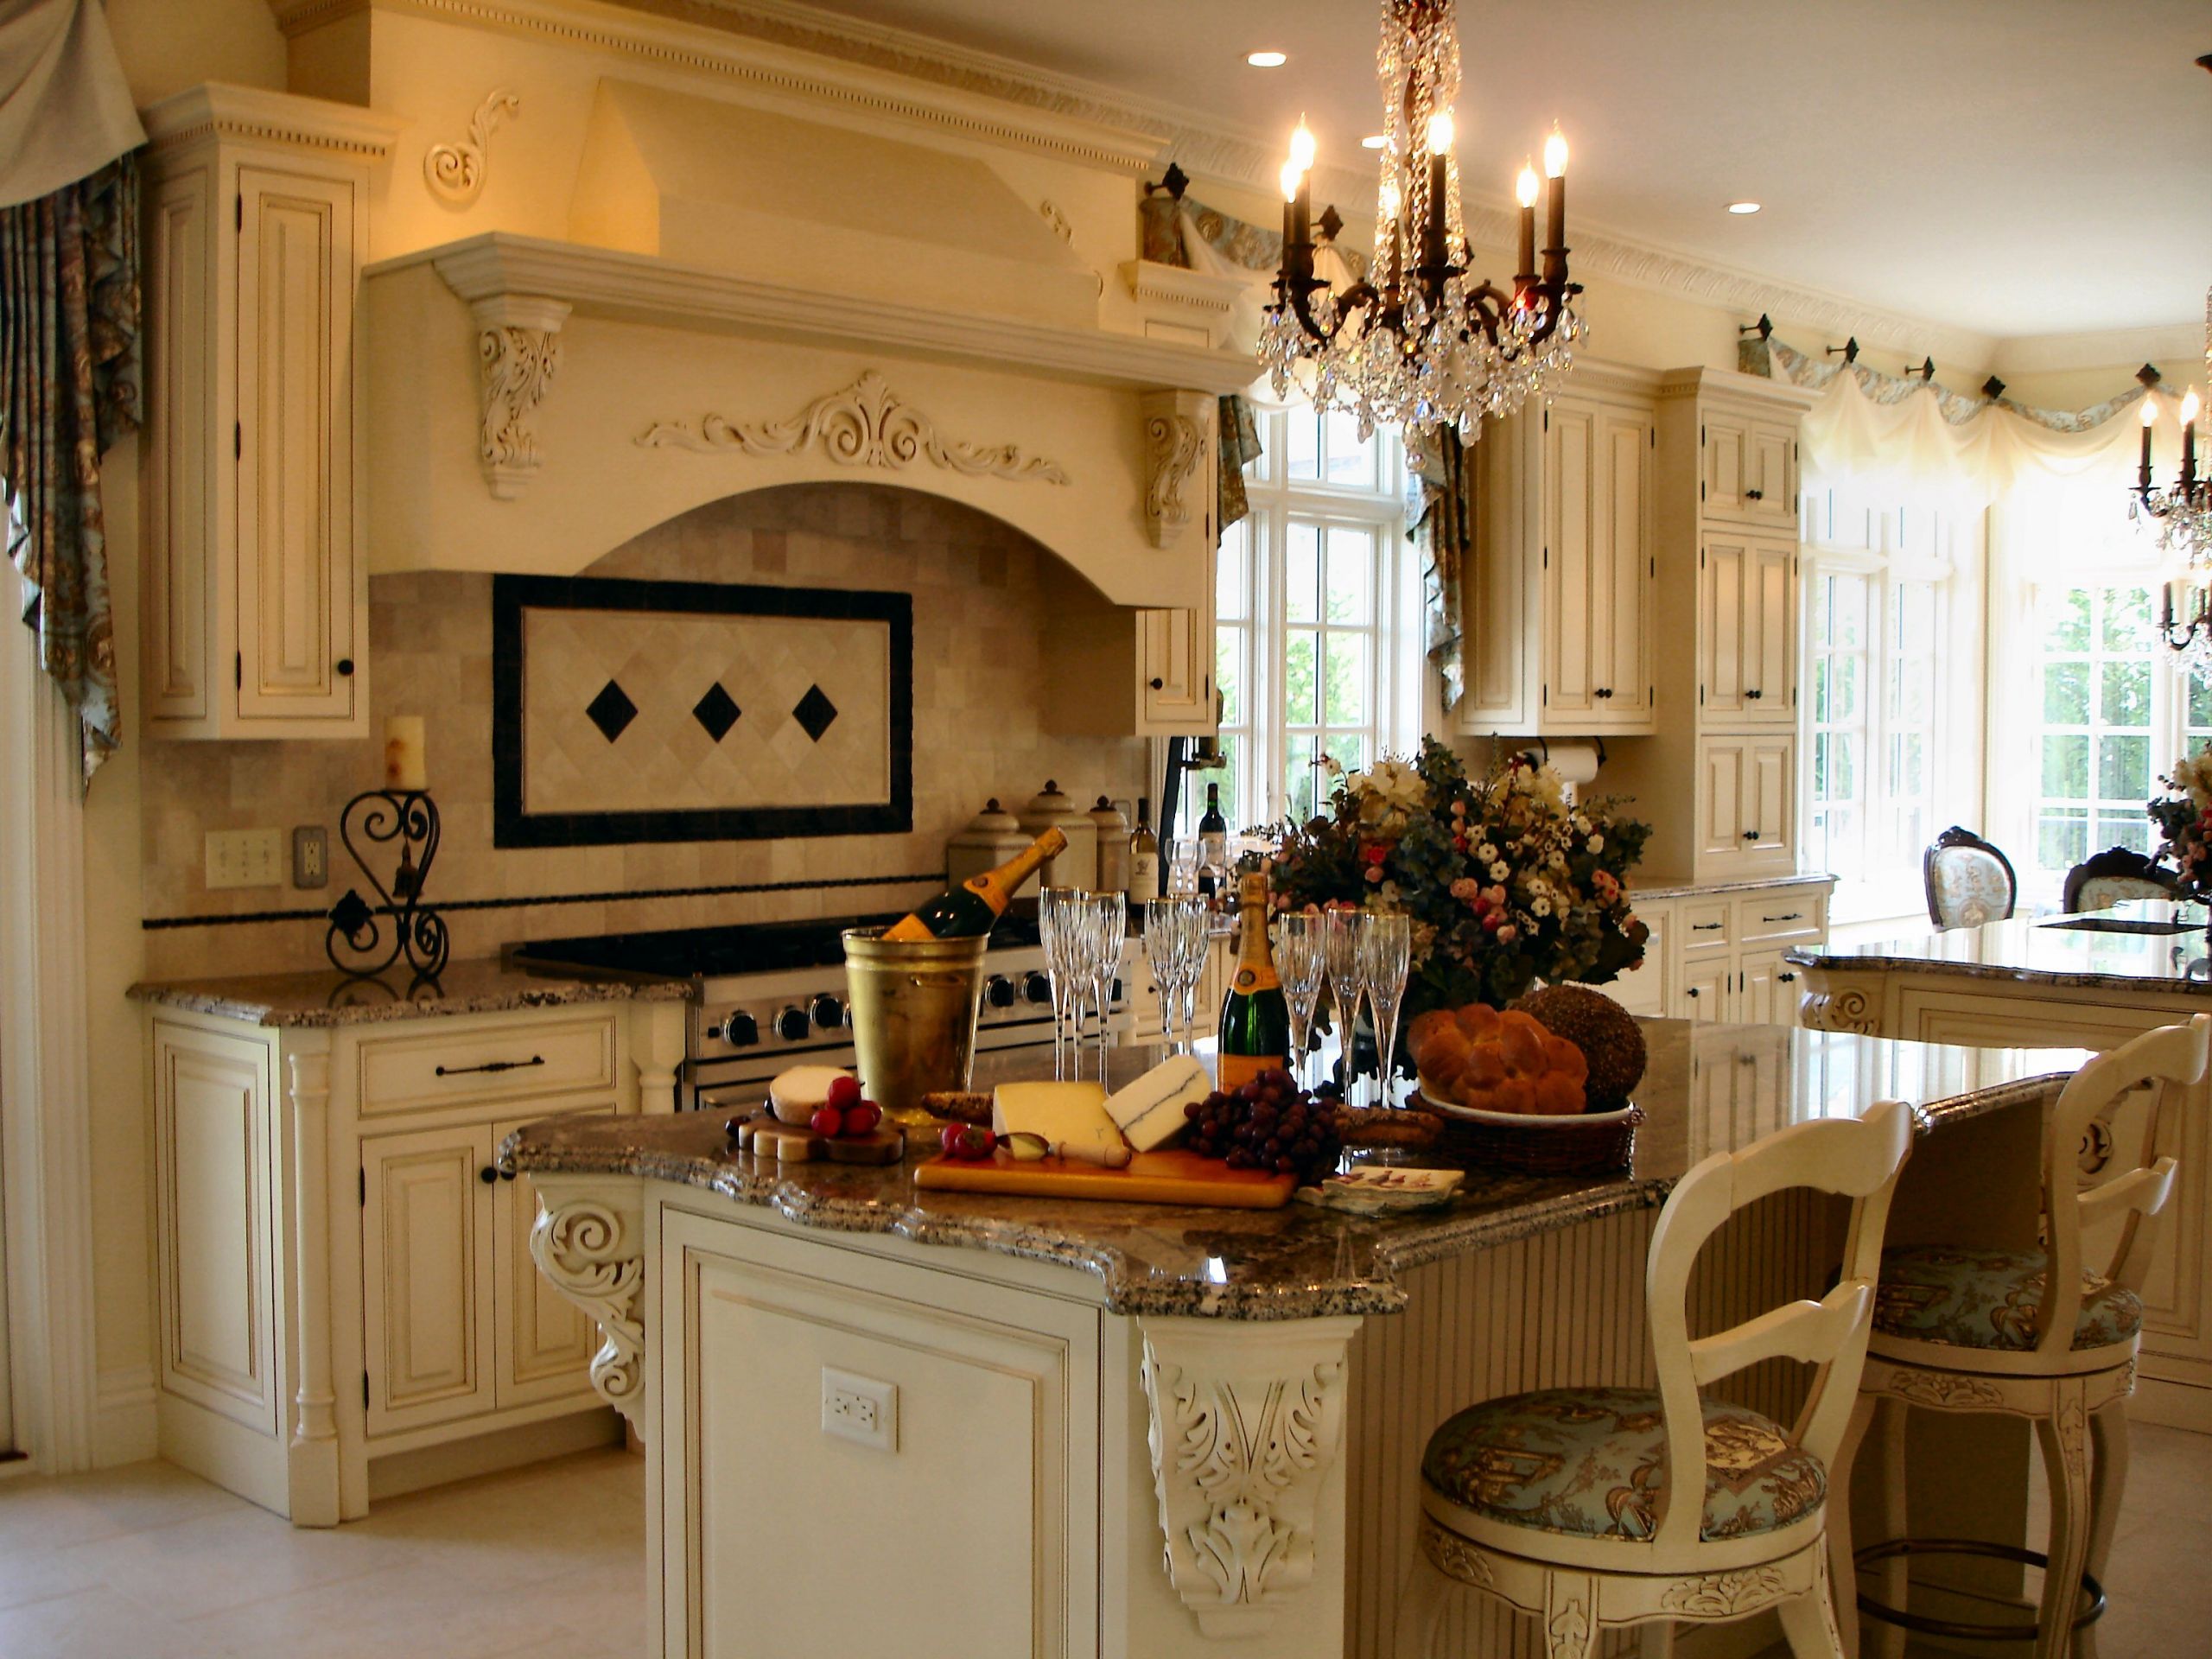 Kitchen Remodeling Tips
 Monmouth County Kitchen Remodeling Ideas to Inspire You